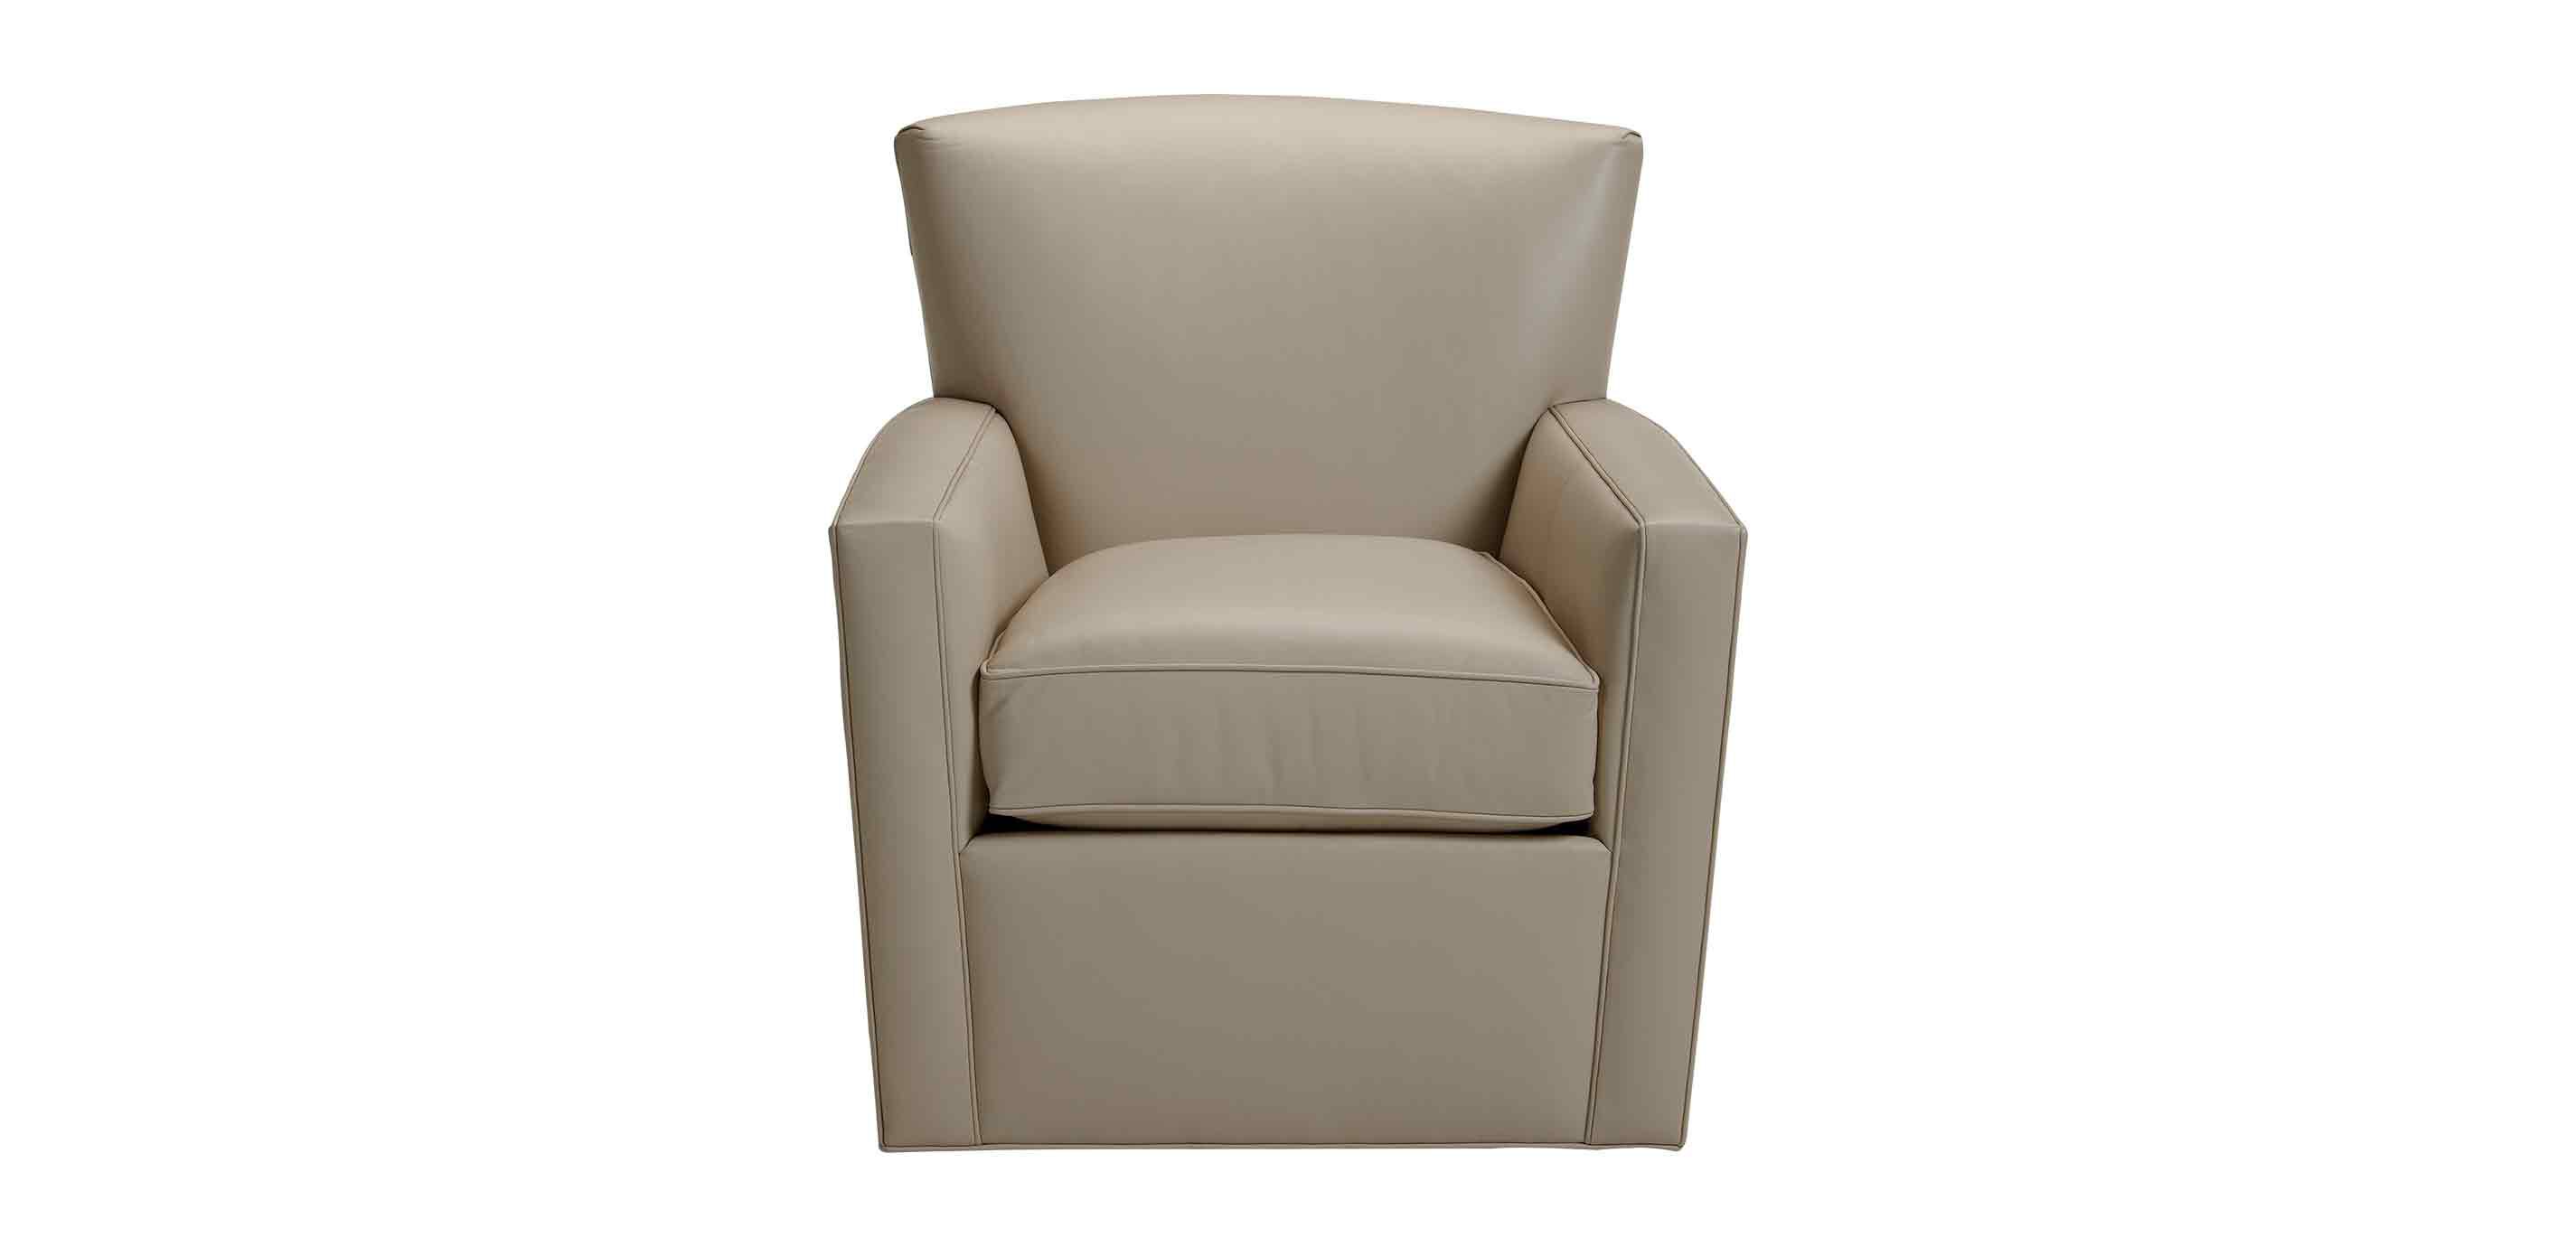 Turner Leather Swivel Chair